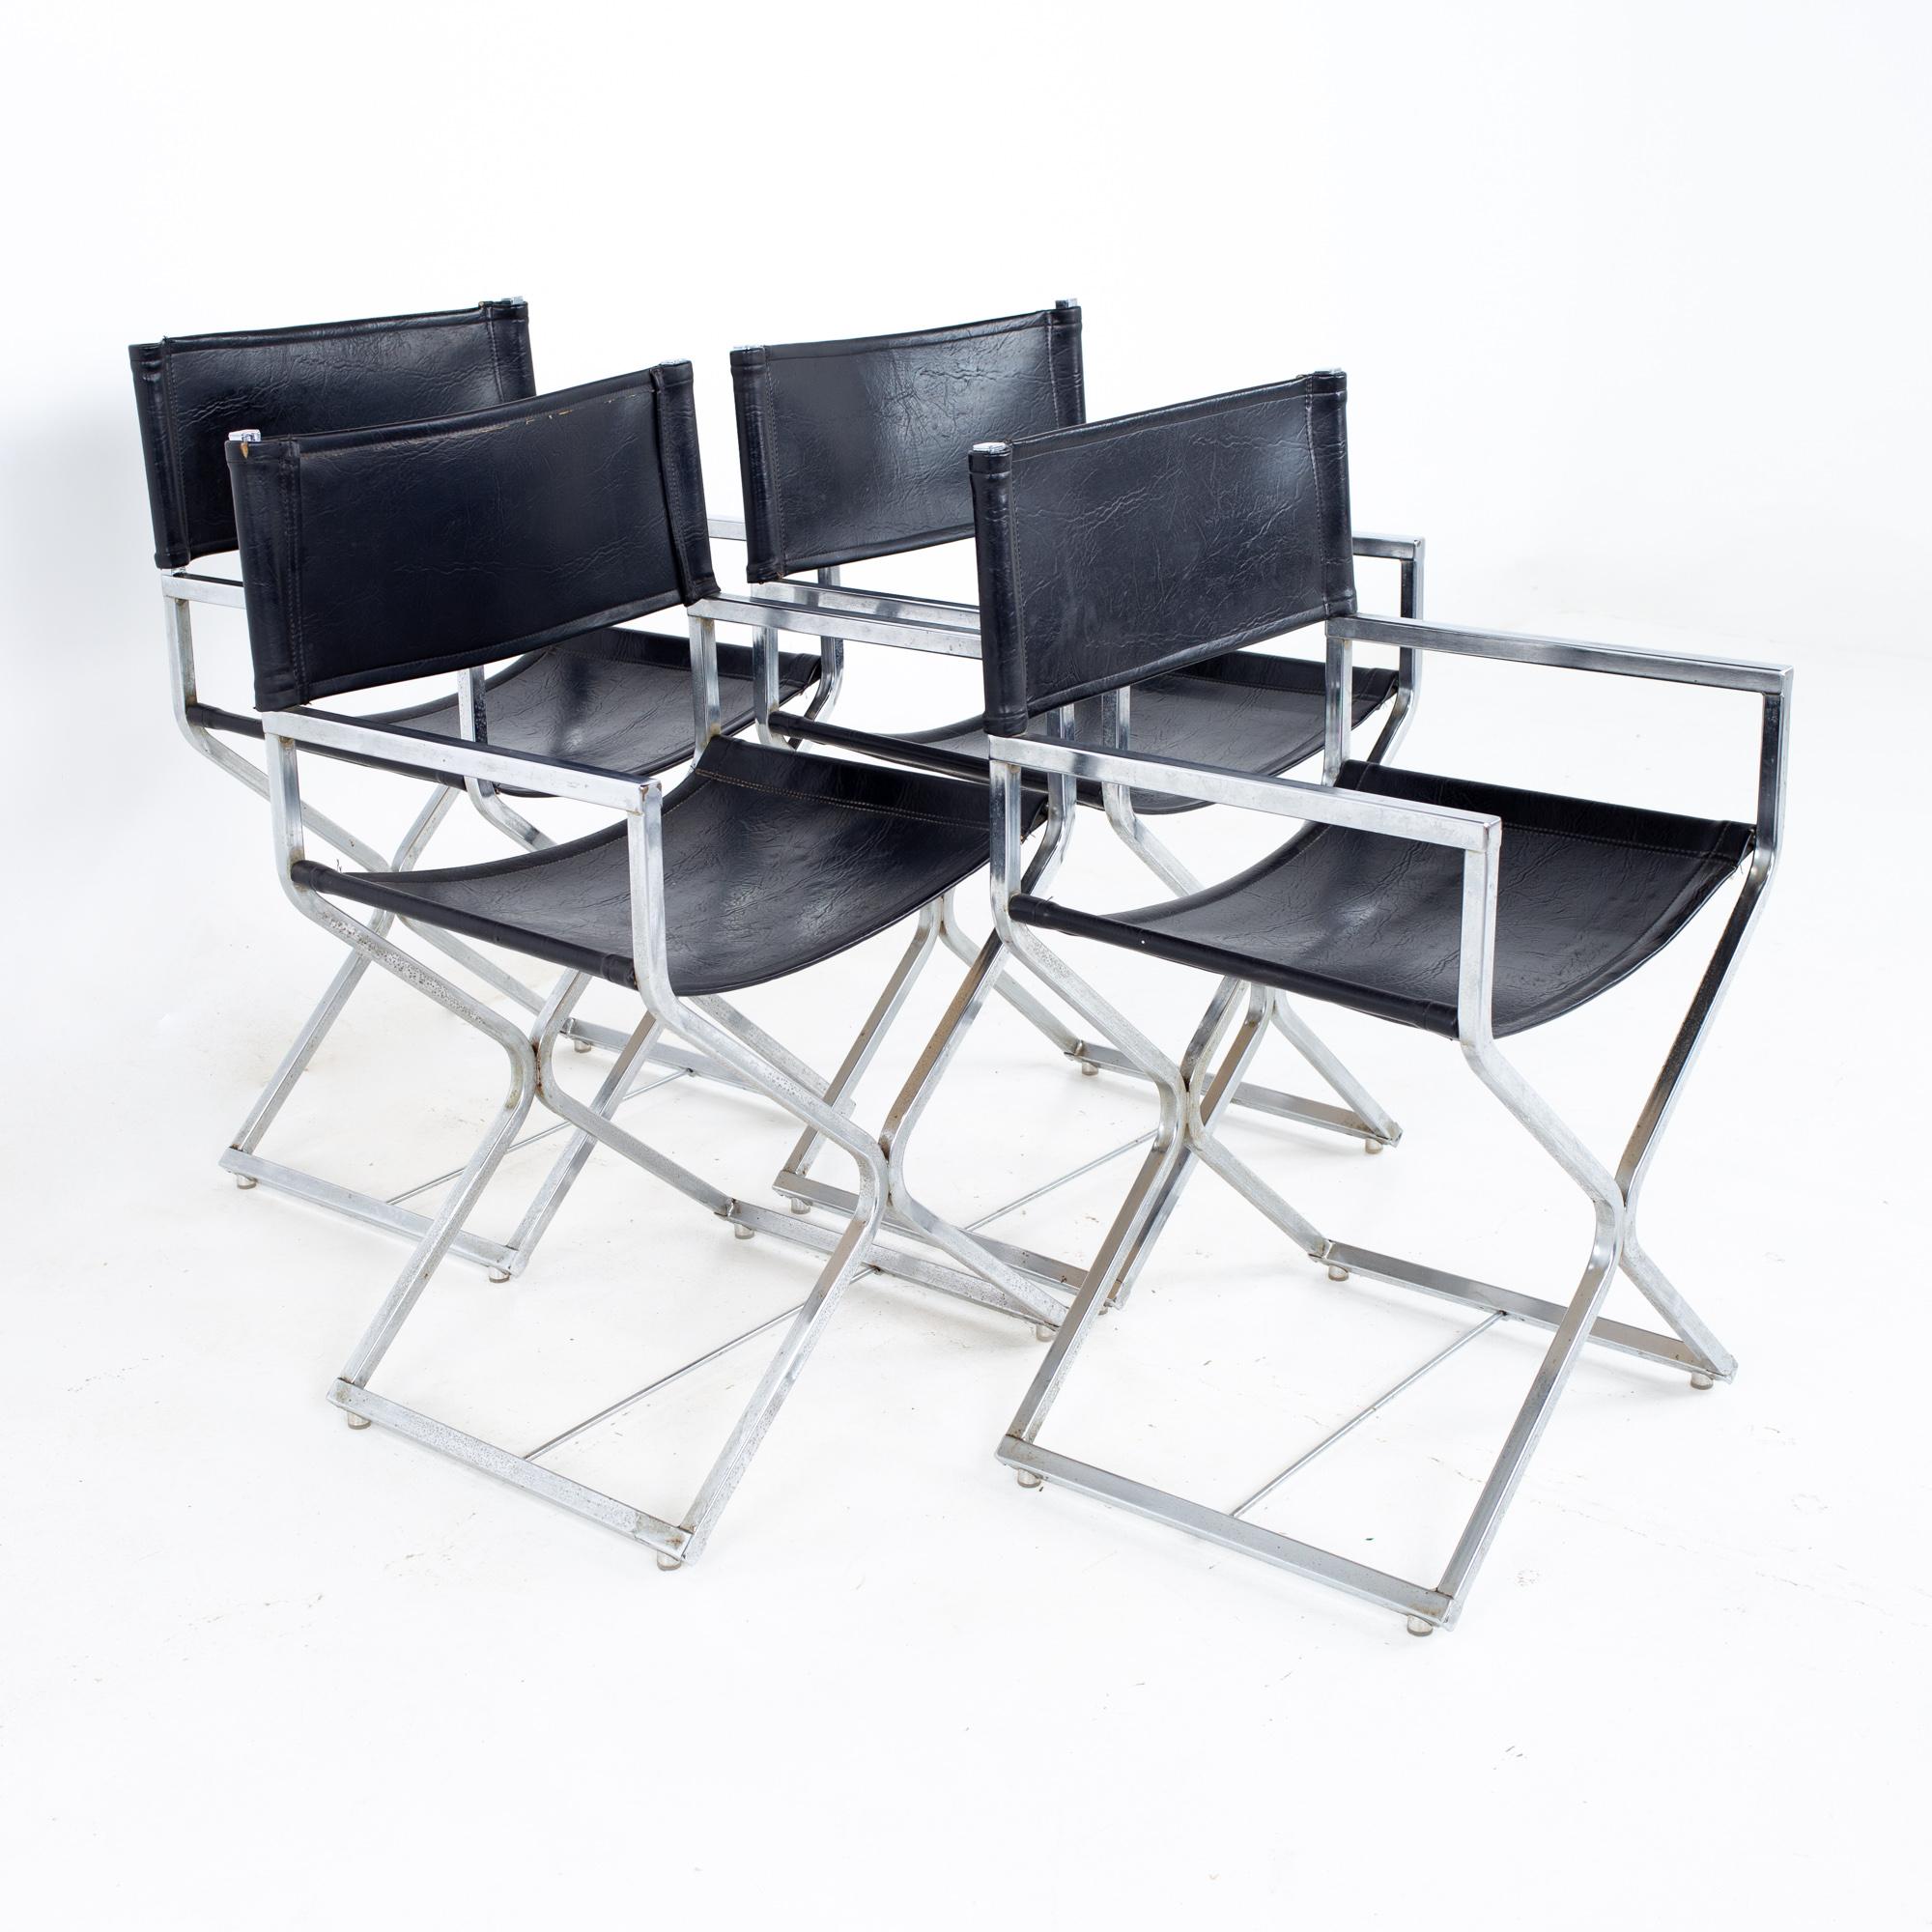 Late 20th Century Alessandro Albrizzi Style MCM Naugahyde and Chrome Directors Chairs - Set of 6 For Sale